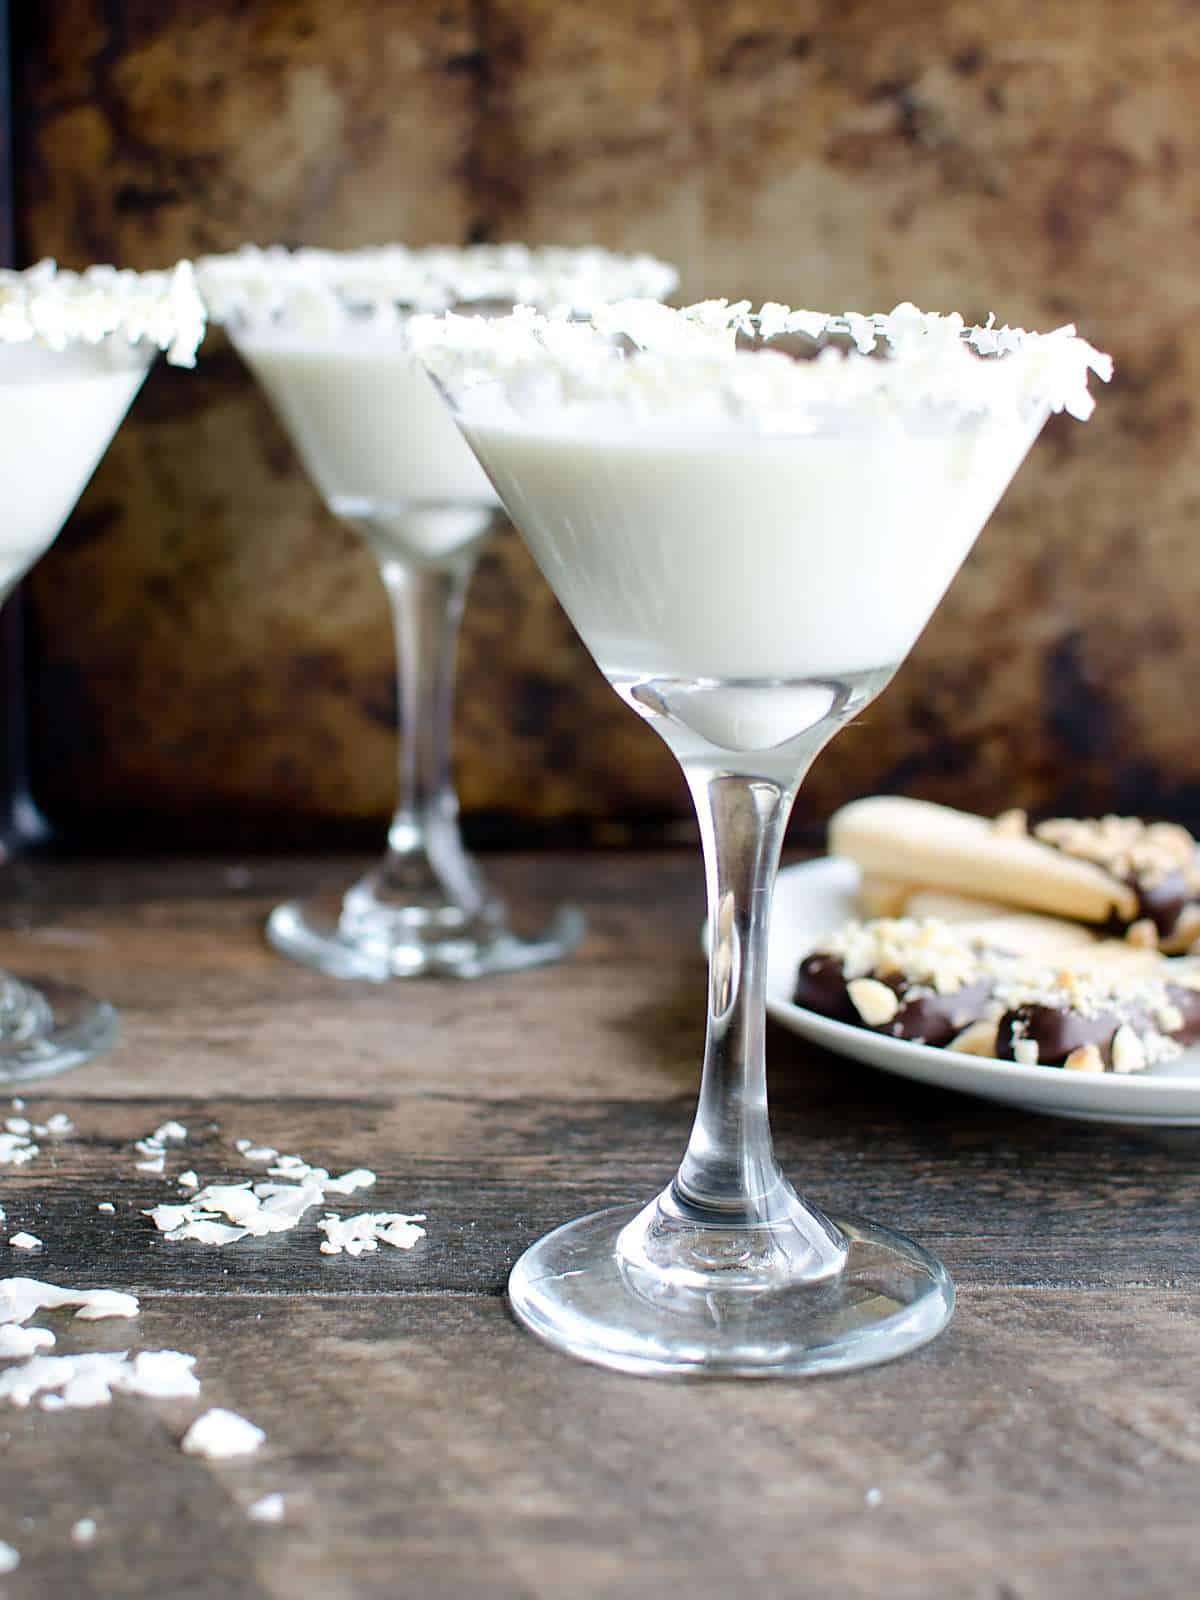 Nonalcoholic pineapple coconut martini's with a plate of chocolate dipped lady fingers. 